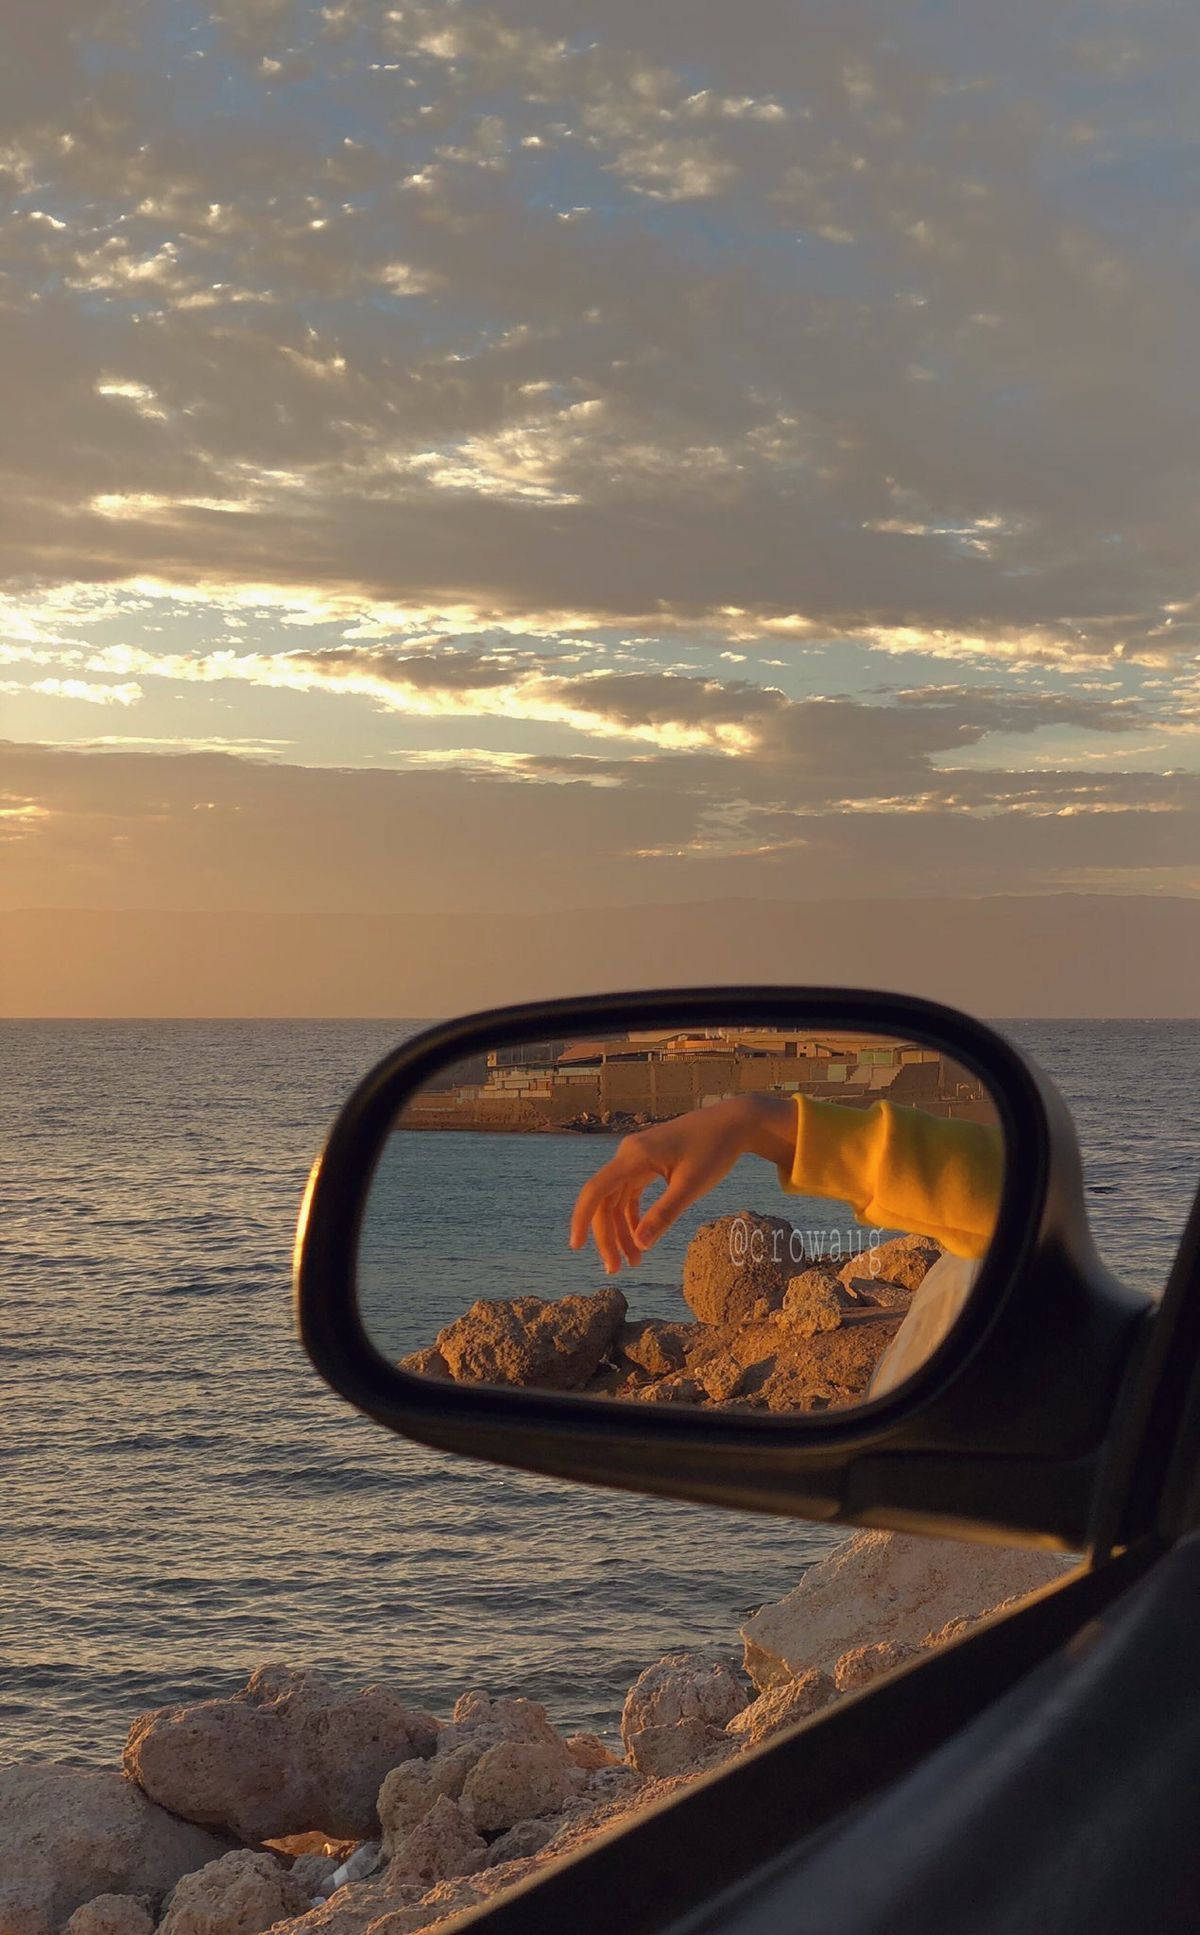 A car mirror shows the reflection of someone's hand - Travel